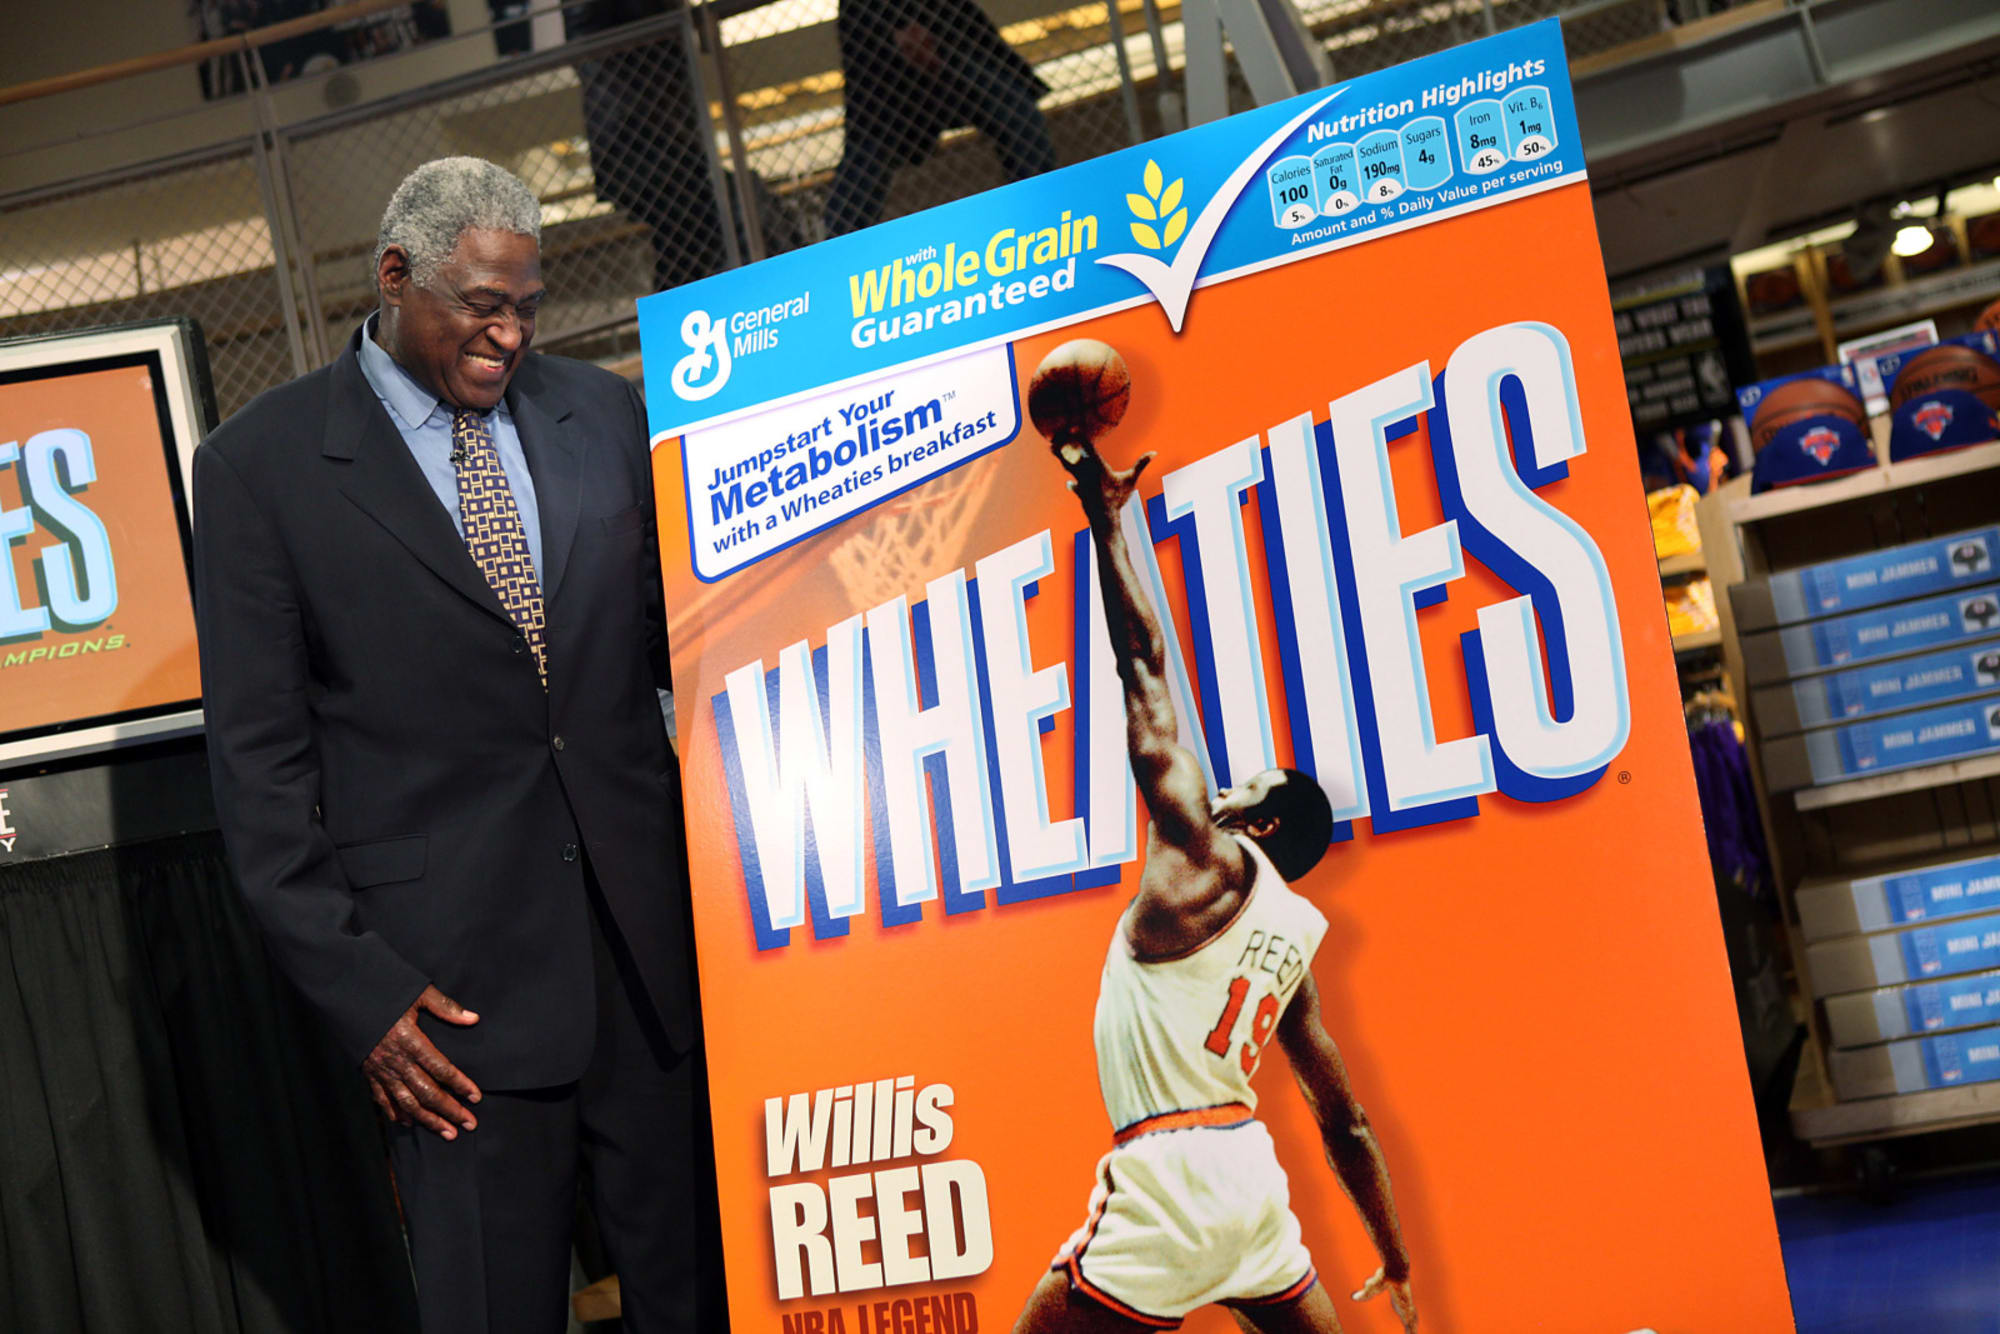 New York Knicks This Week: Willis Reed as NBA Finals Hero - Sports  Illustrated New York Knicks News, Analysis and More